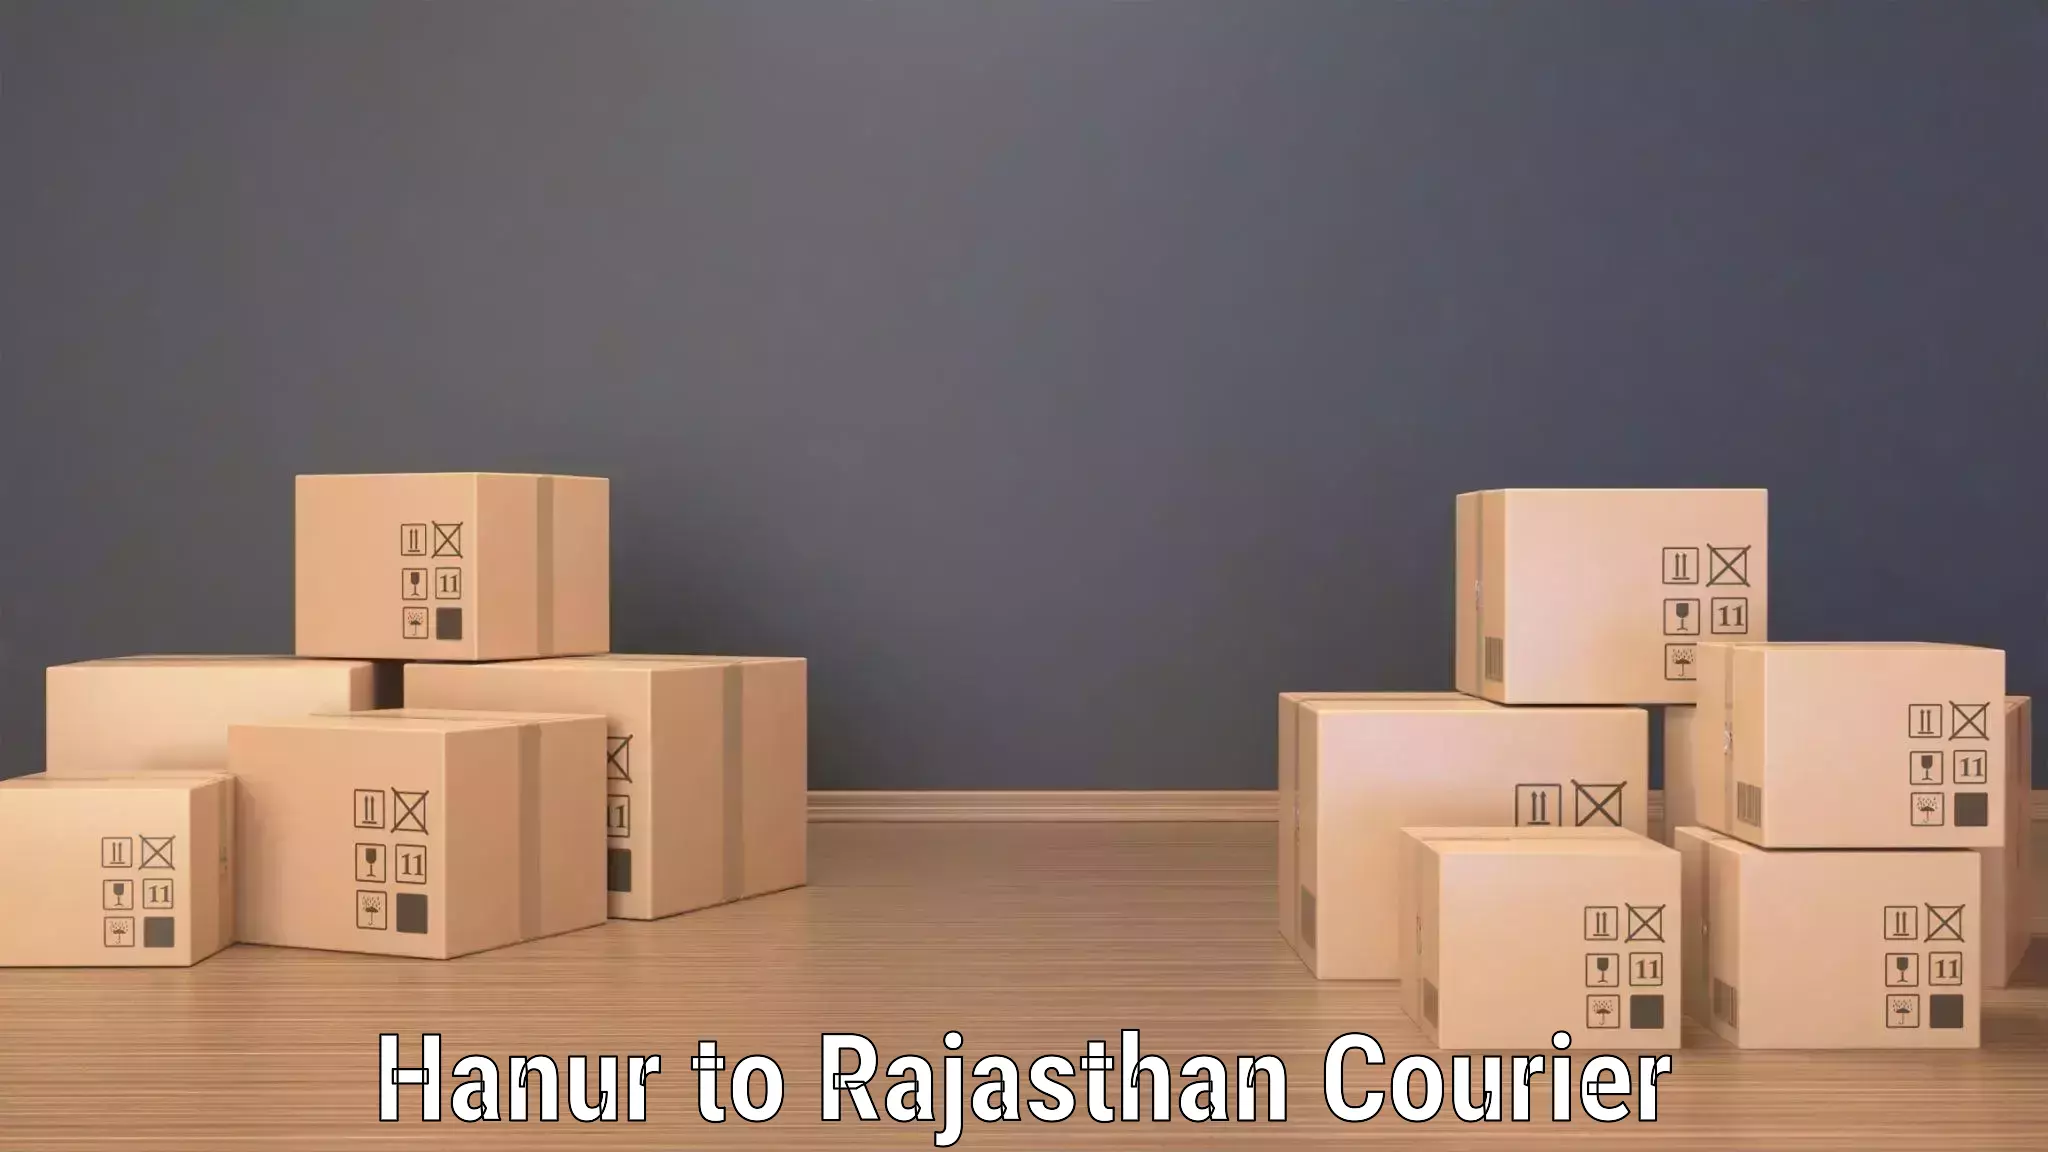 Courier service efficiency Hanur to Rajasthan